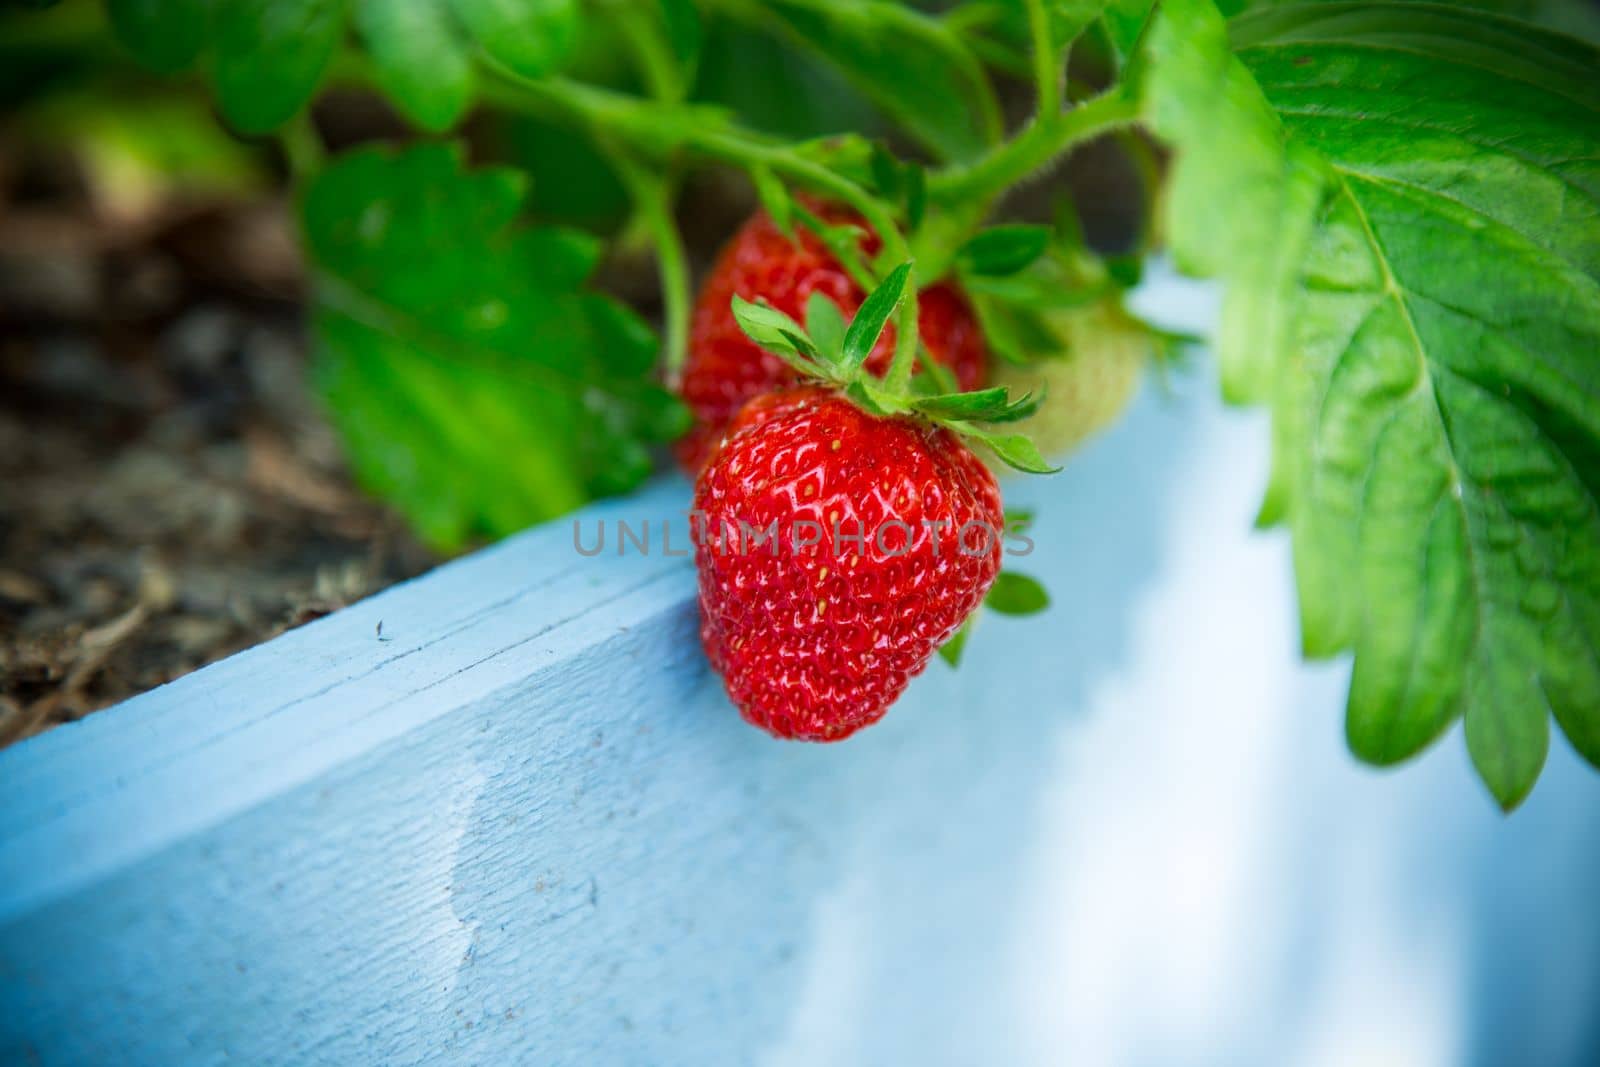 Ripe red strawberries grow on a wooden garden bed outdoors